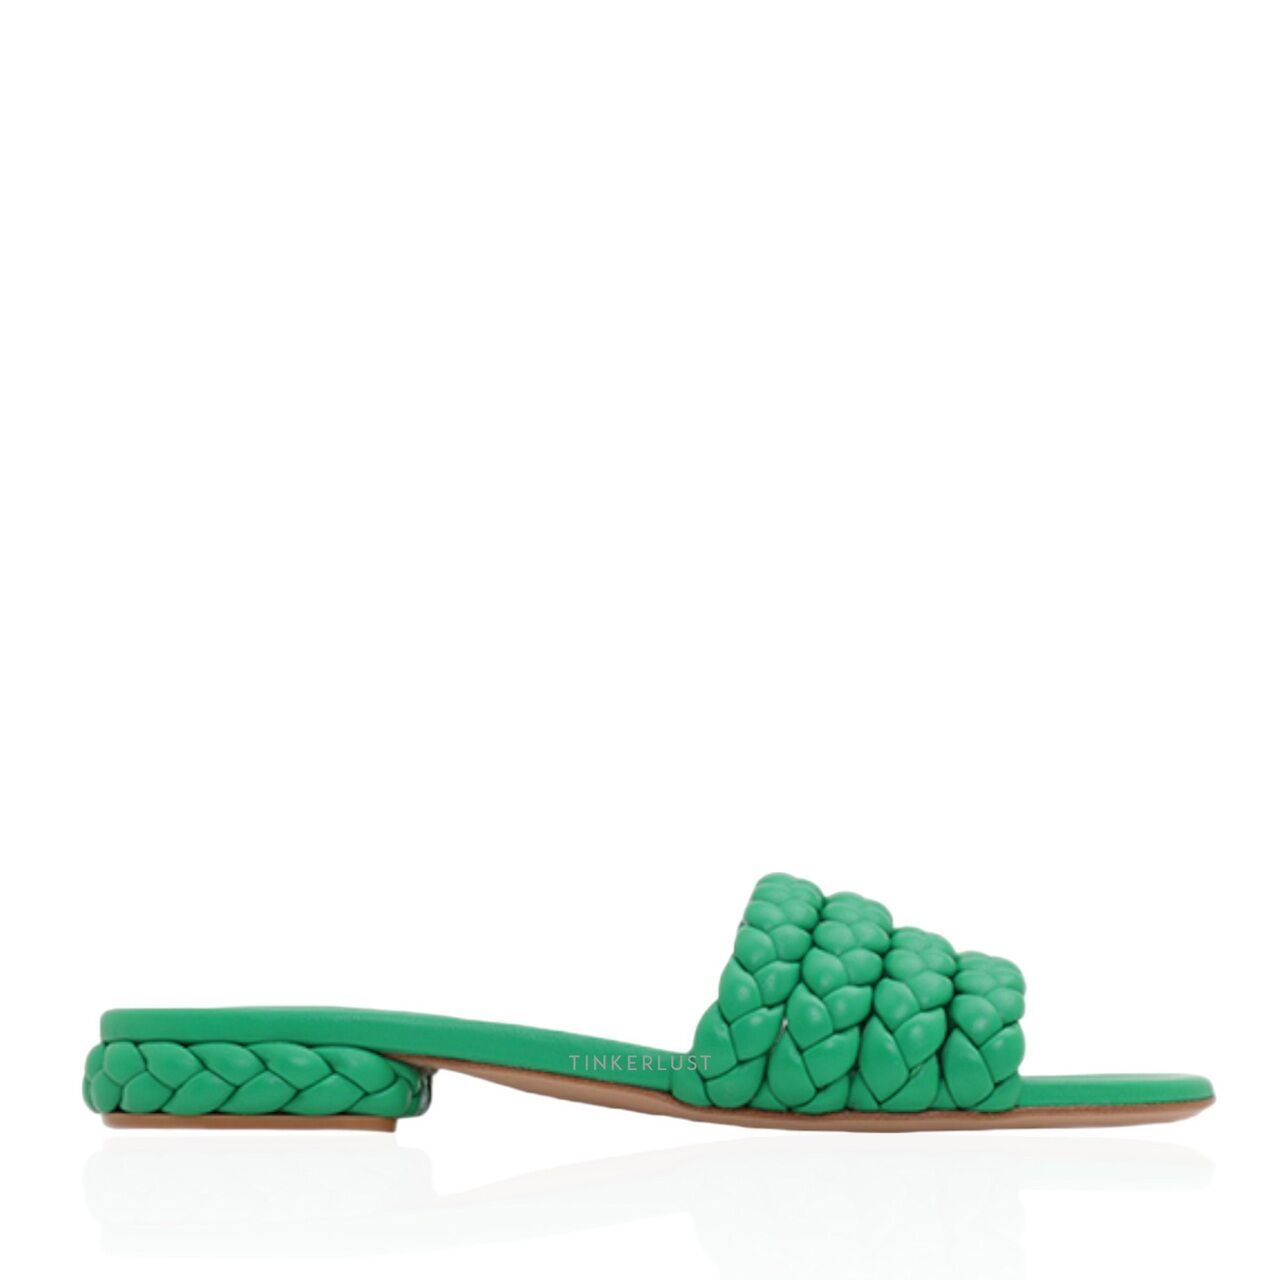 Gianvito Rossi Ischia Mule Green Braided Nappa Leather Sandals